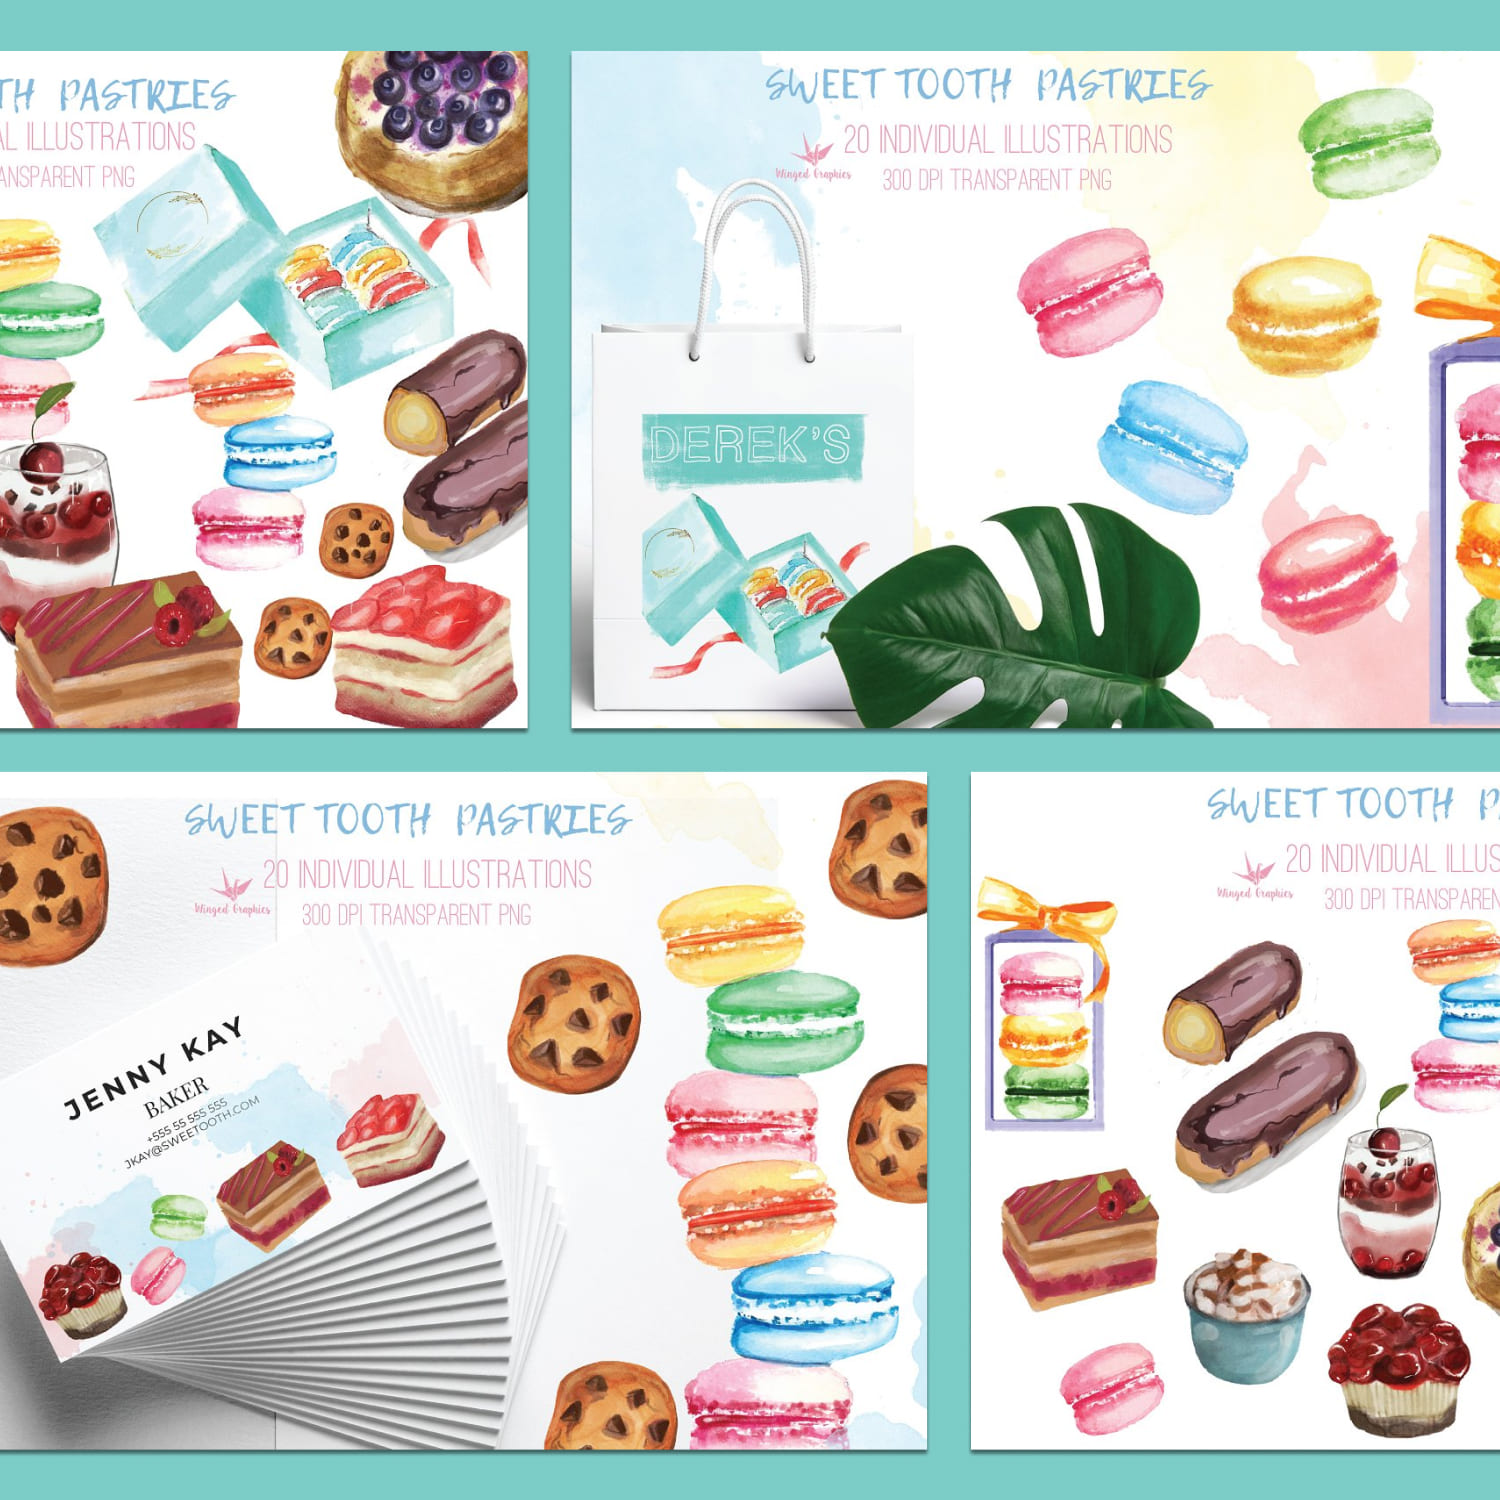 Watercolor sweet pastries, desserts created by Winged Graphics.